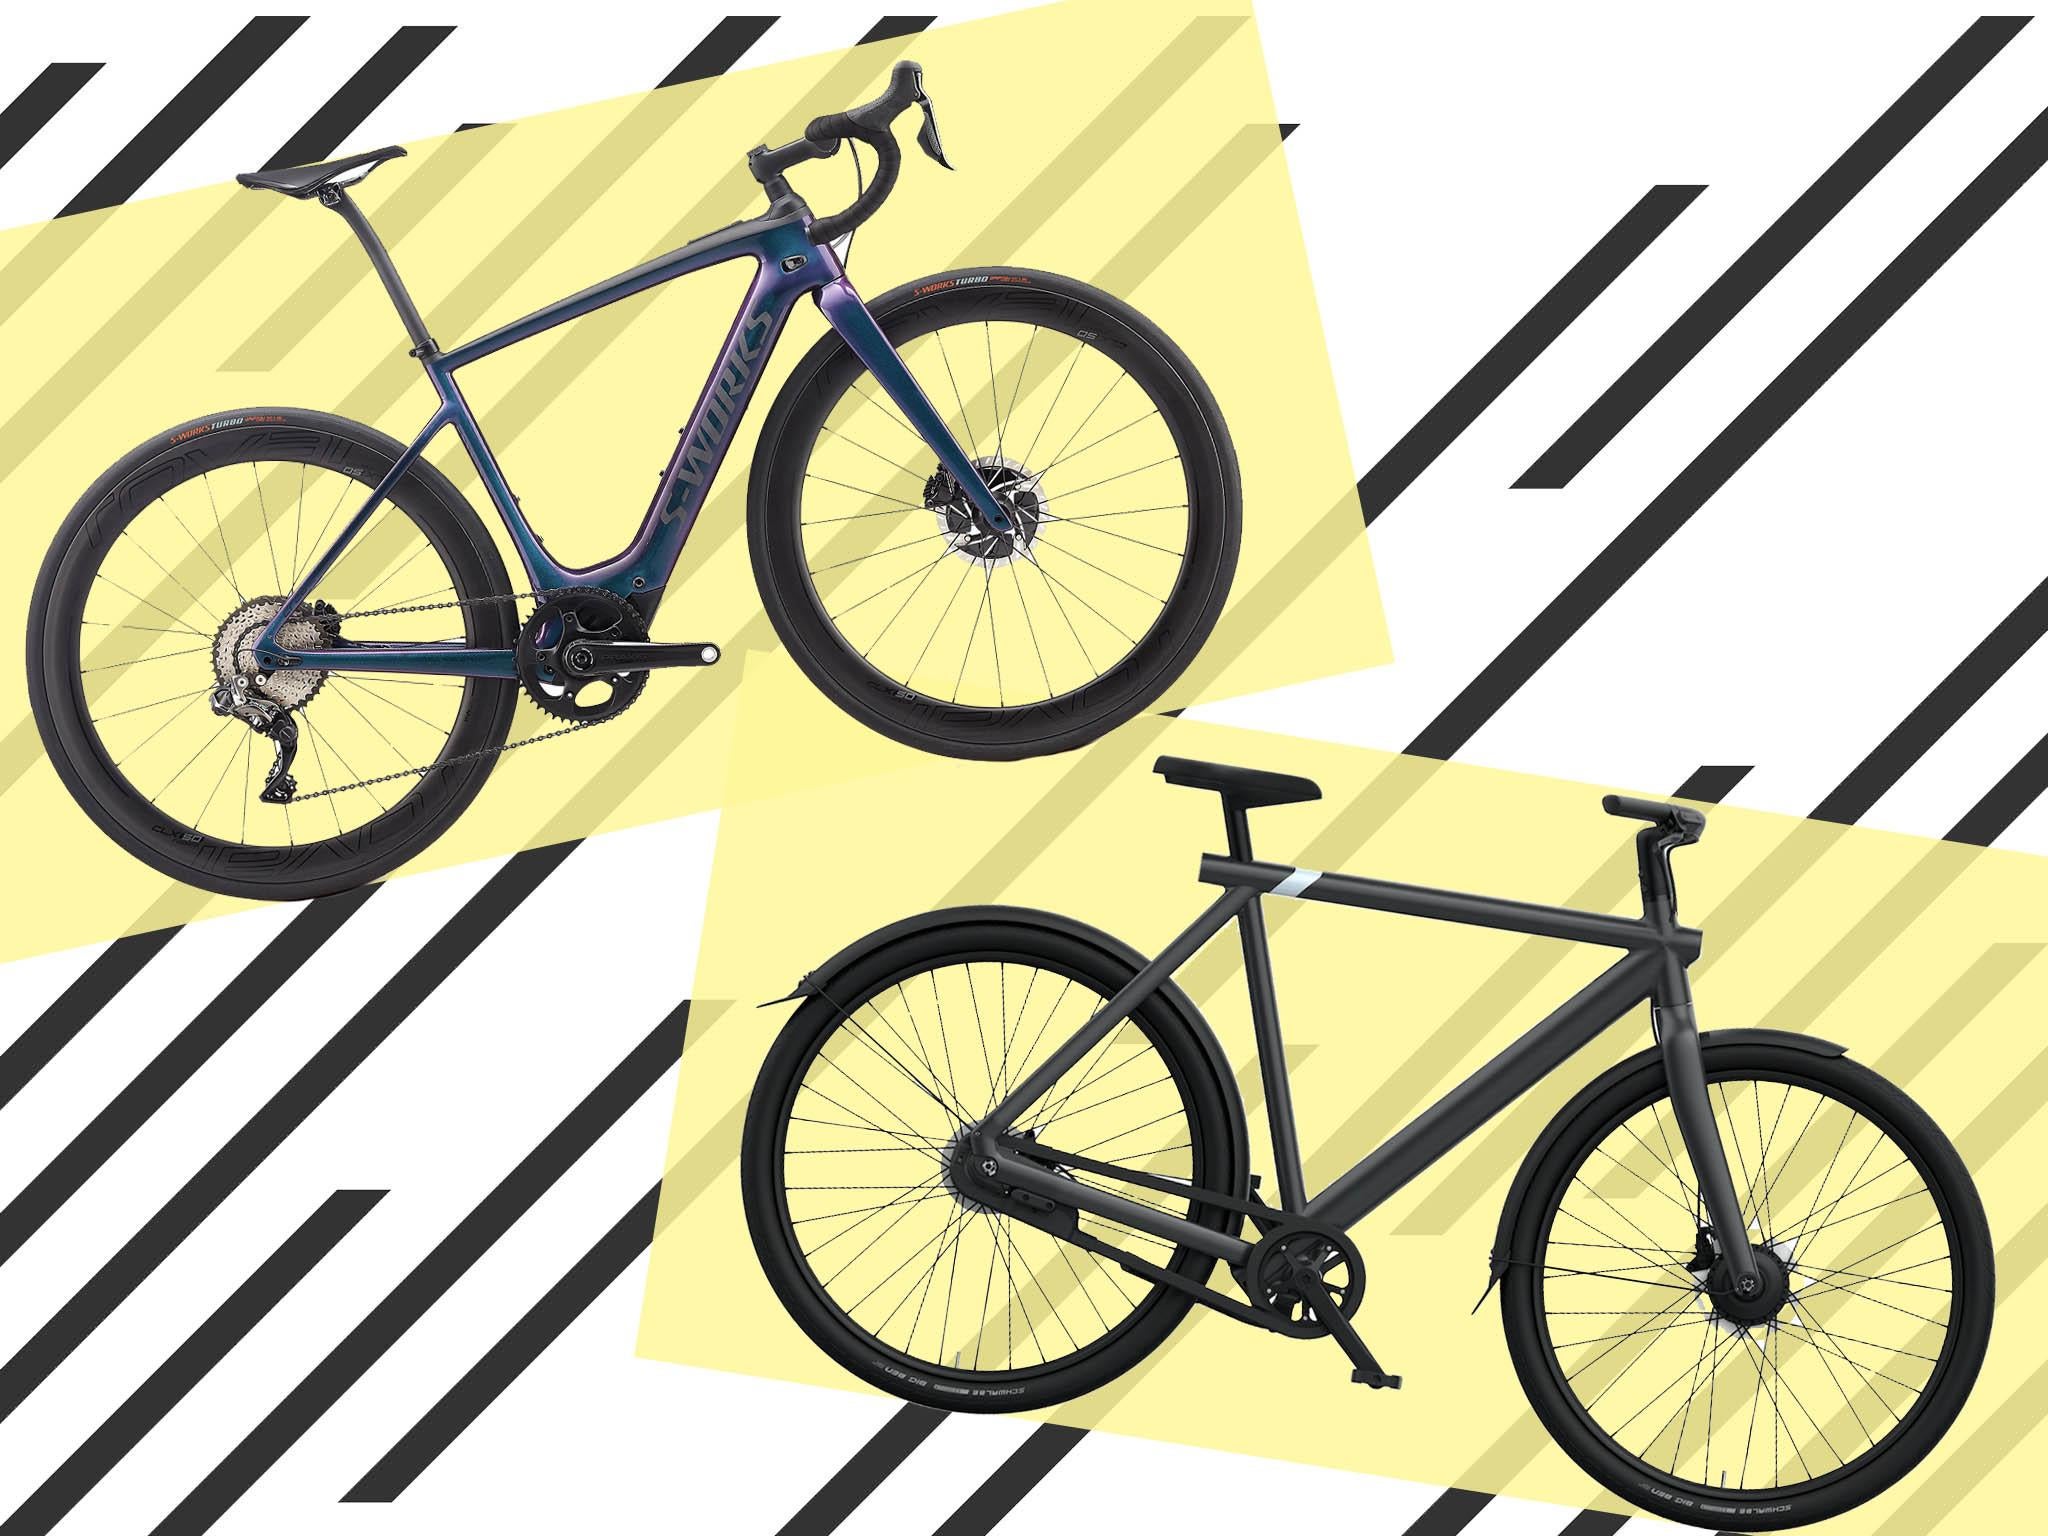 With an ebike being quite the investment, our beginners guide will make sure you commit to the right one